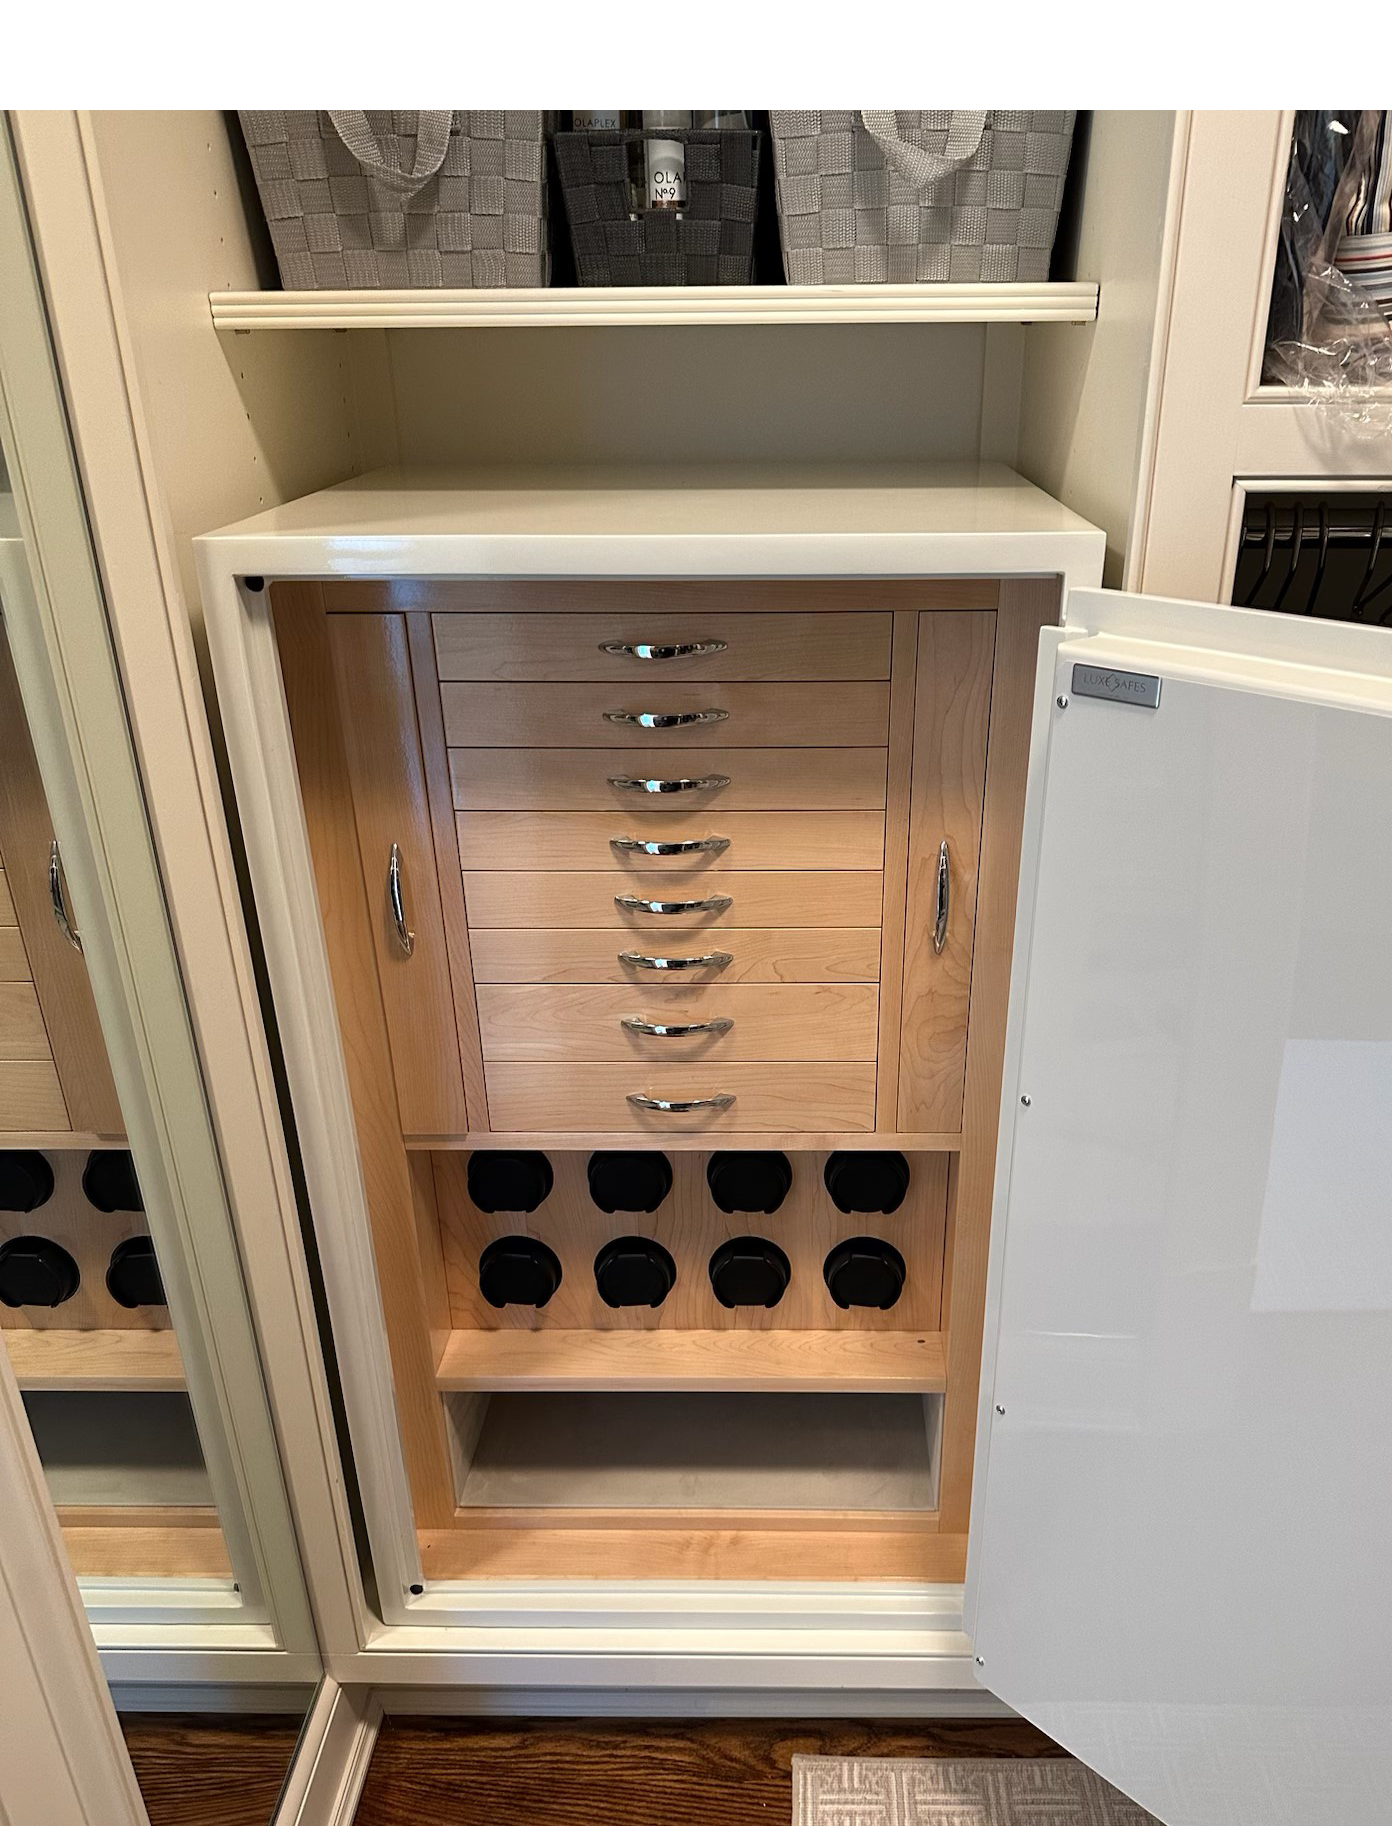 Luxe Watch Winder & Jewelry Safe in White Installed in a Closet